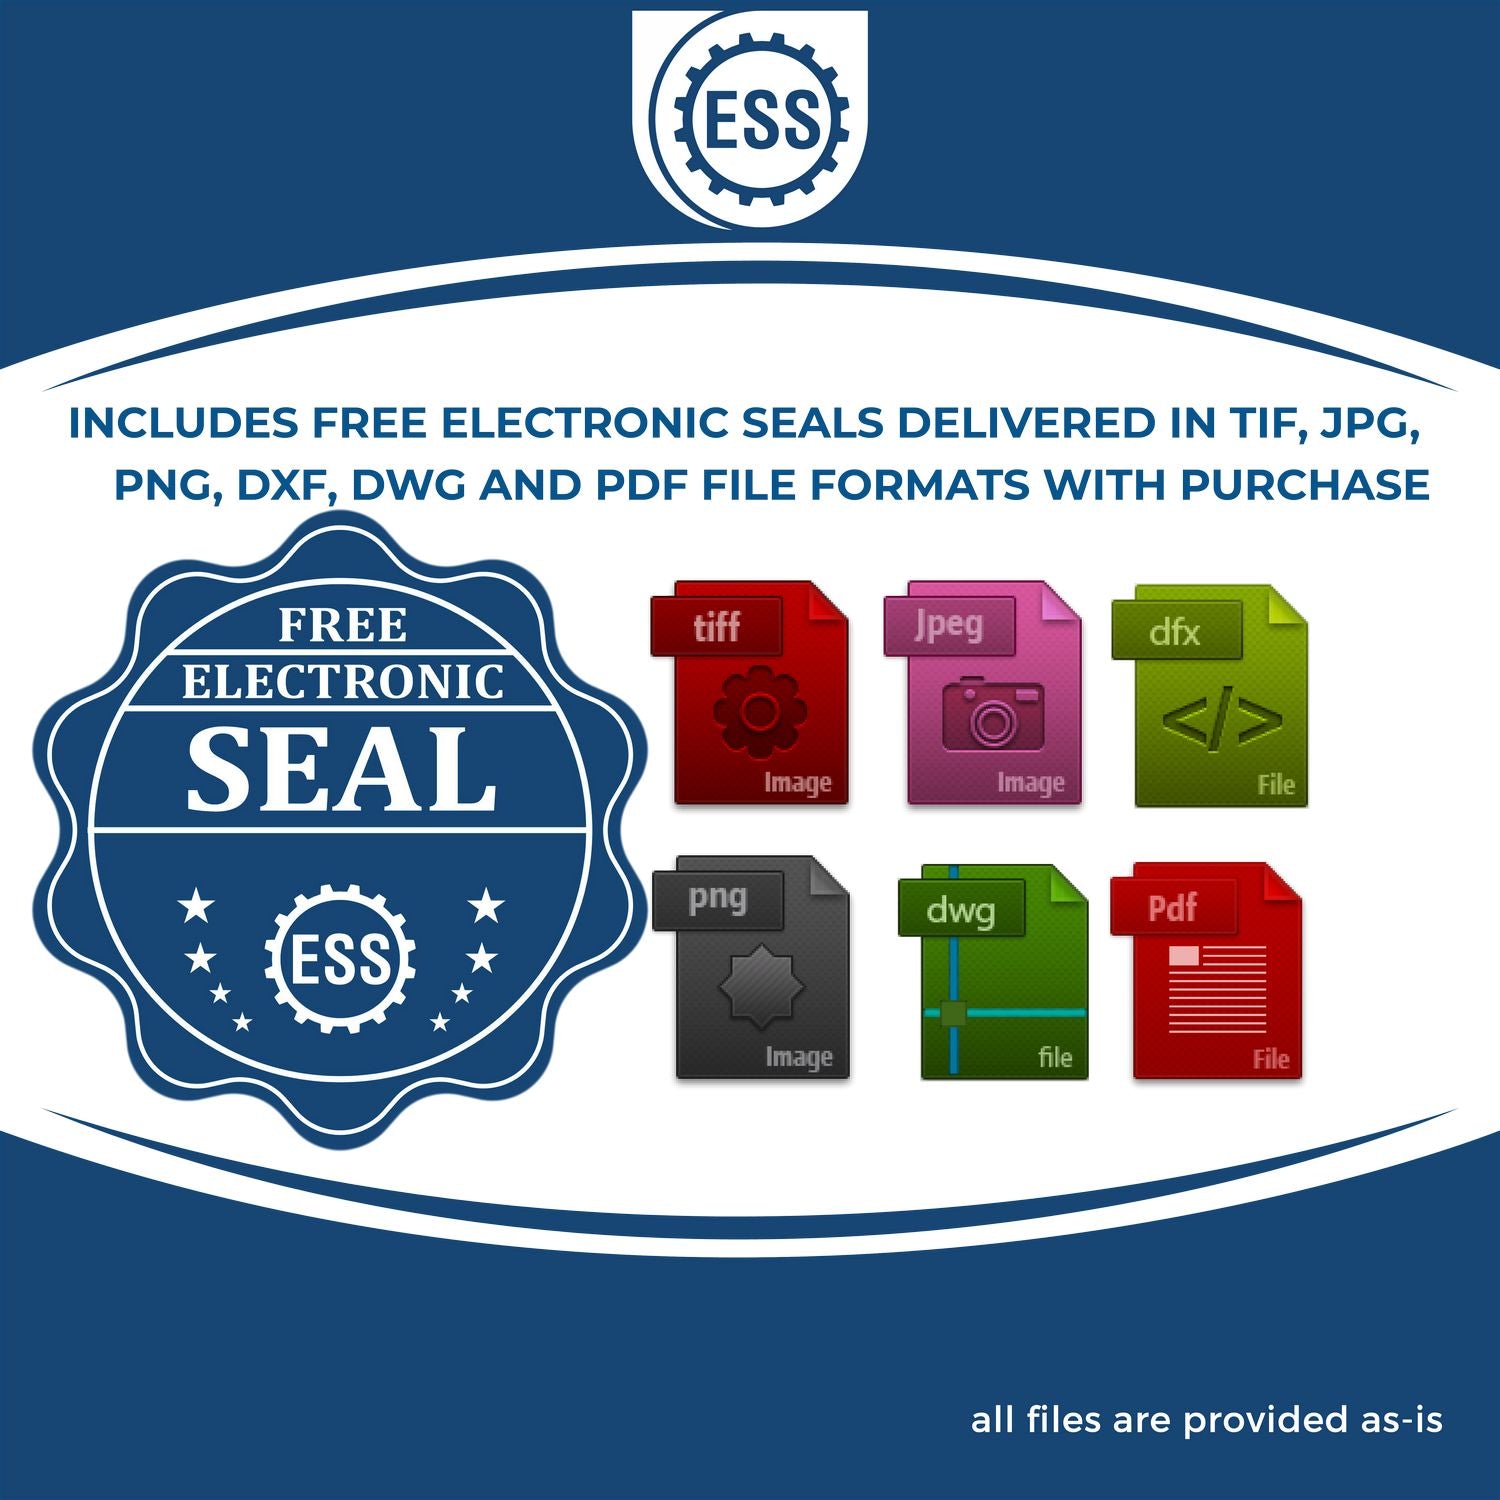 An infographic for the free electronic seal for the Connecticut Desk Landscape Architectural Seal Embosser illustrating the different file type icons such as DXF, DWG, TIF, JPG and PNG.